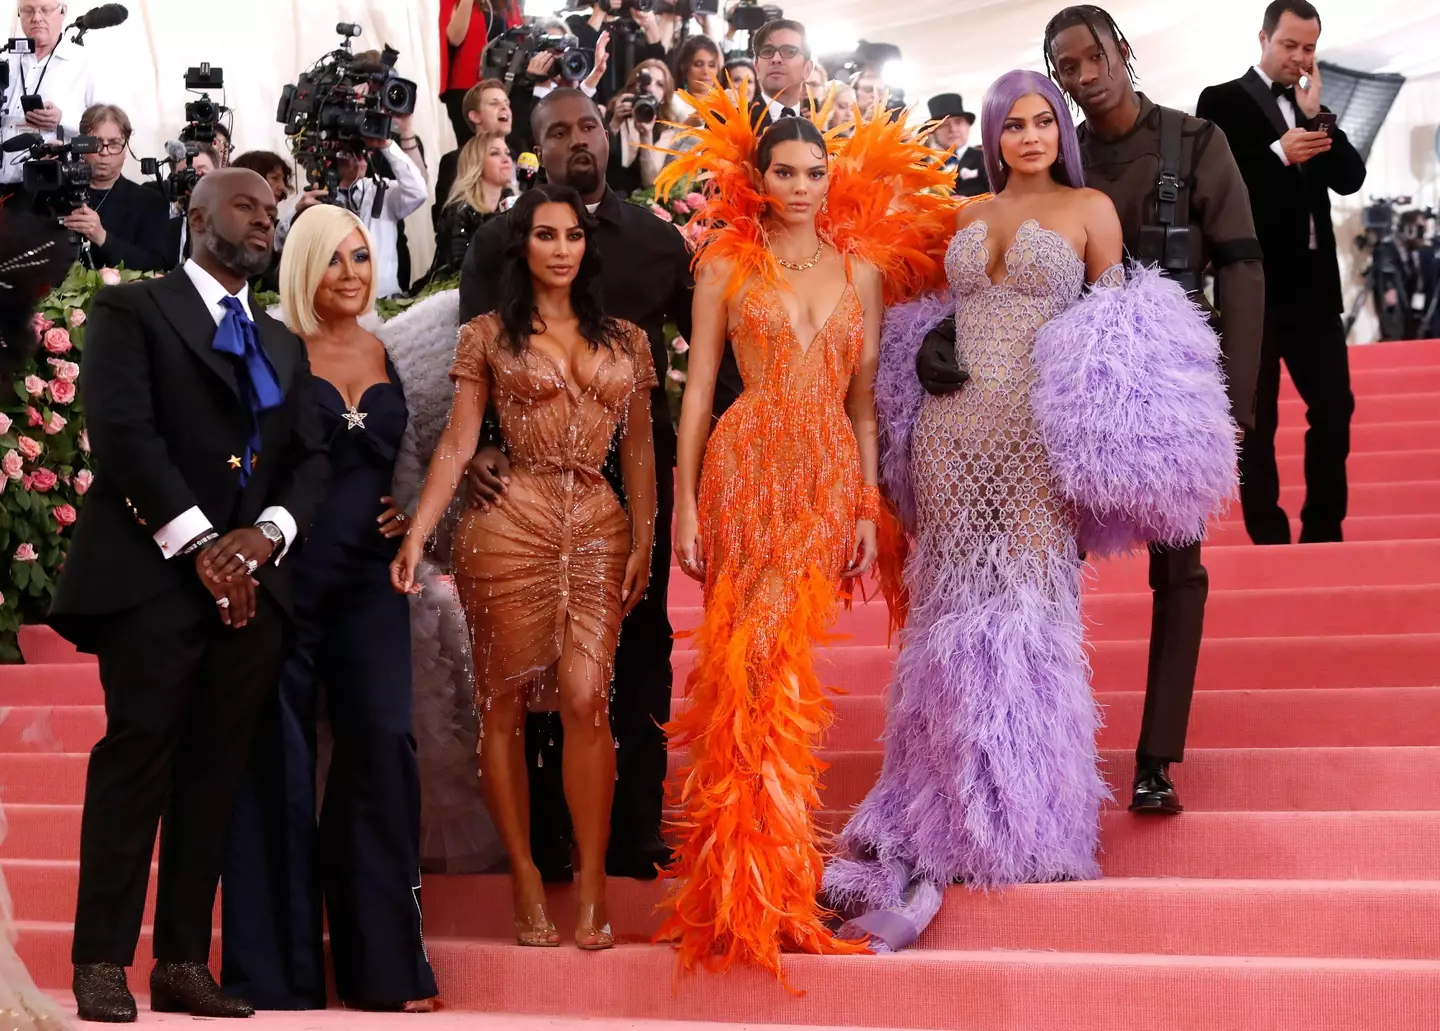 West and the Kardashian-Jenner clan at the 2019 Met Gala.